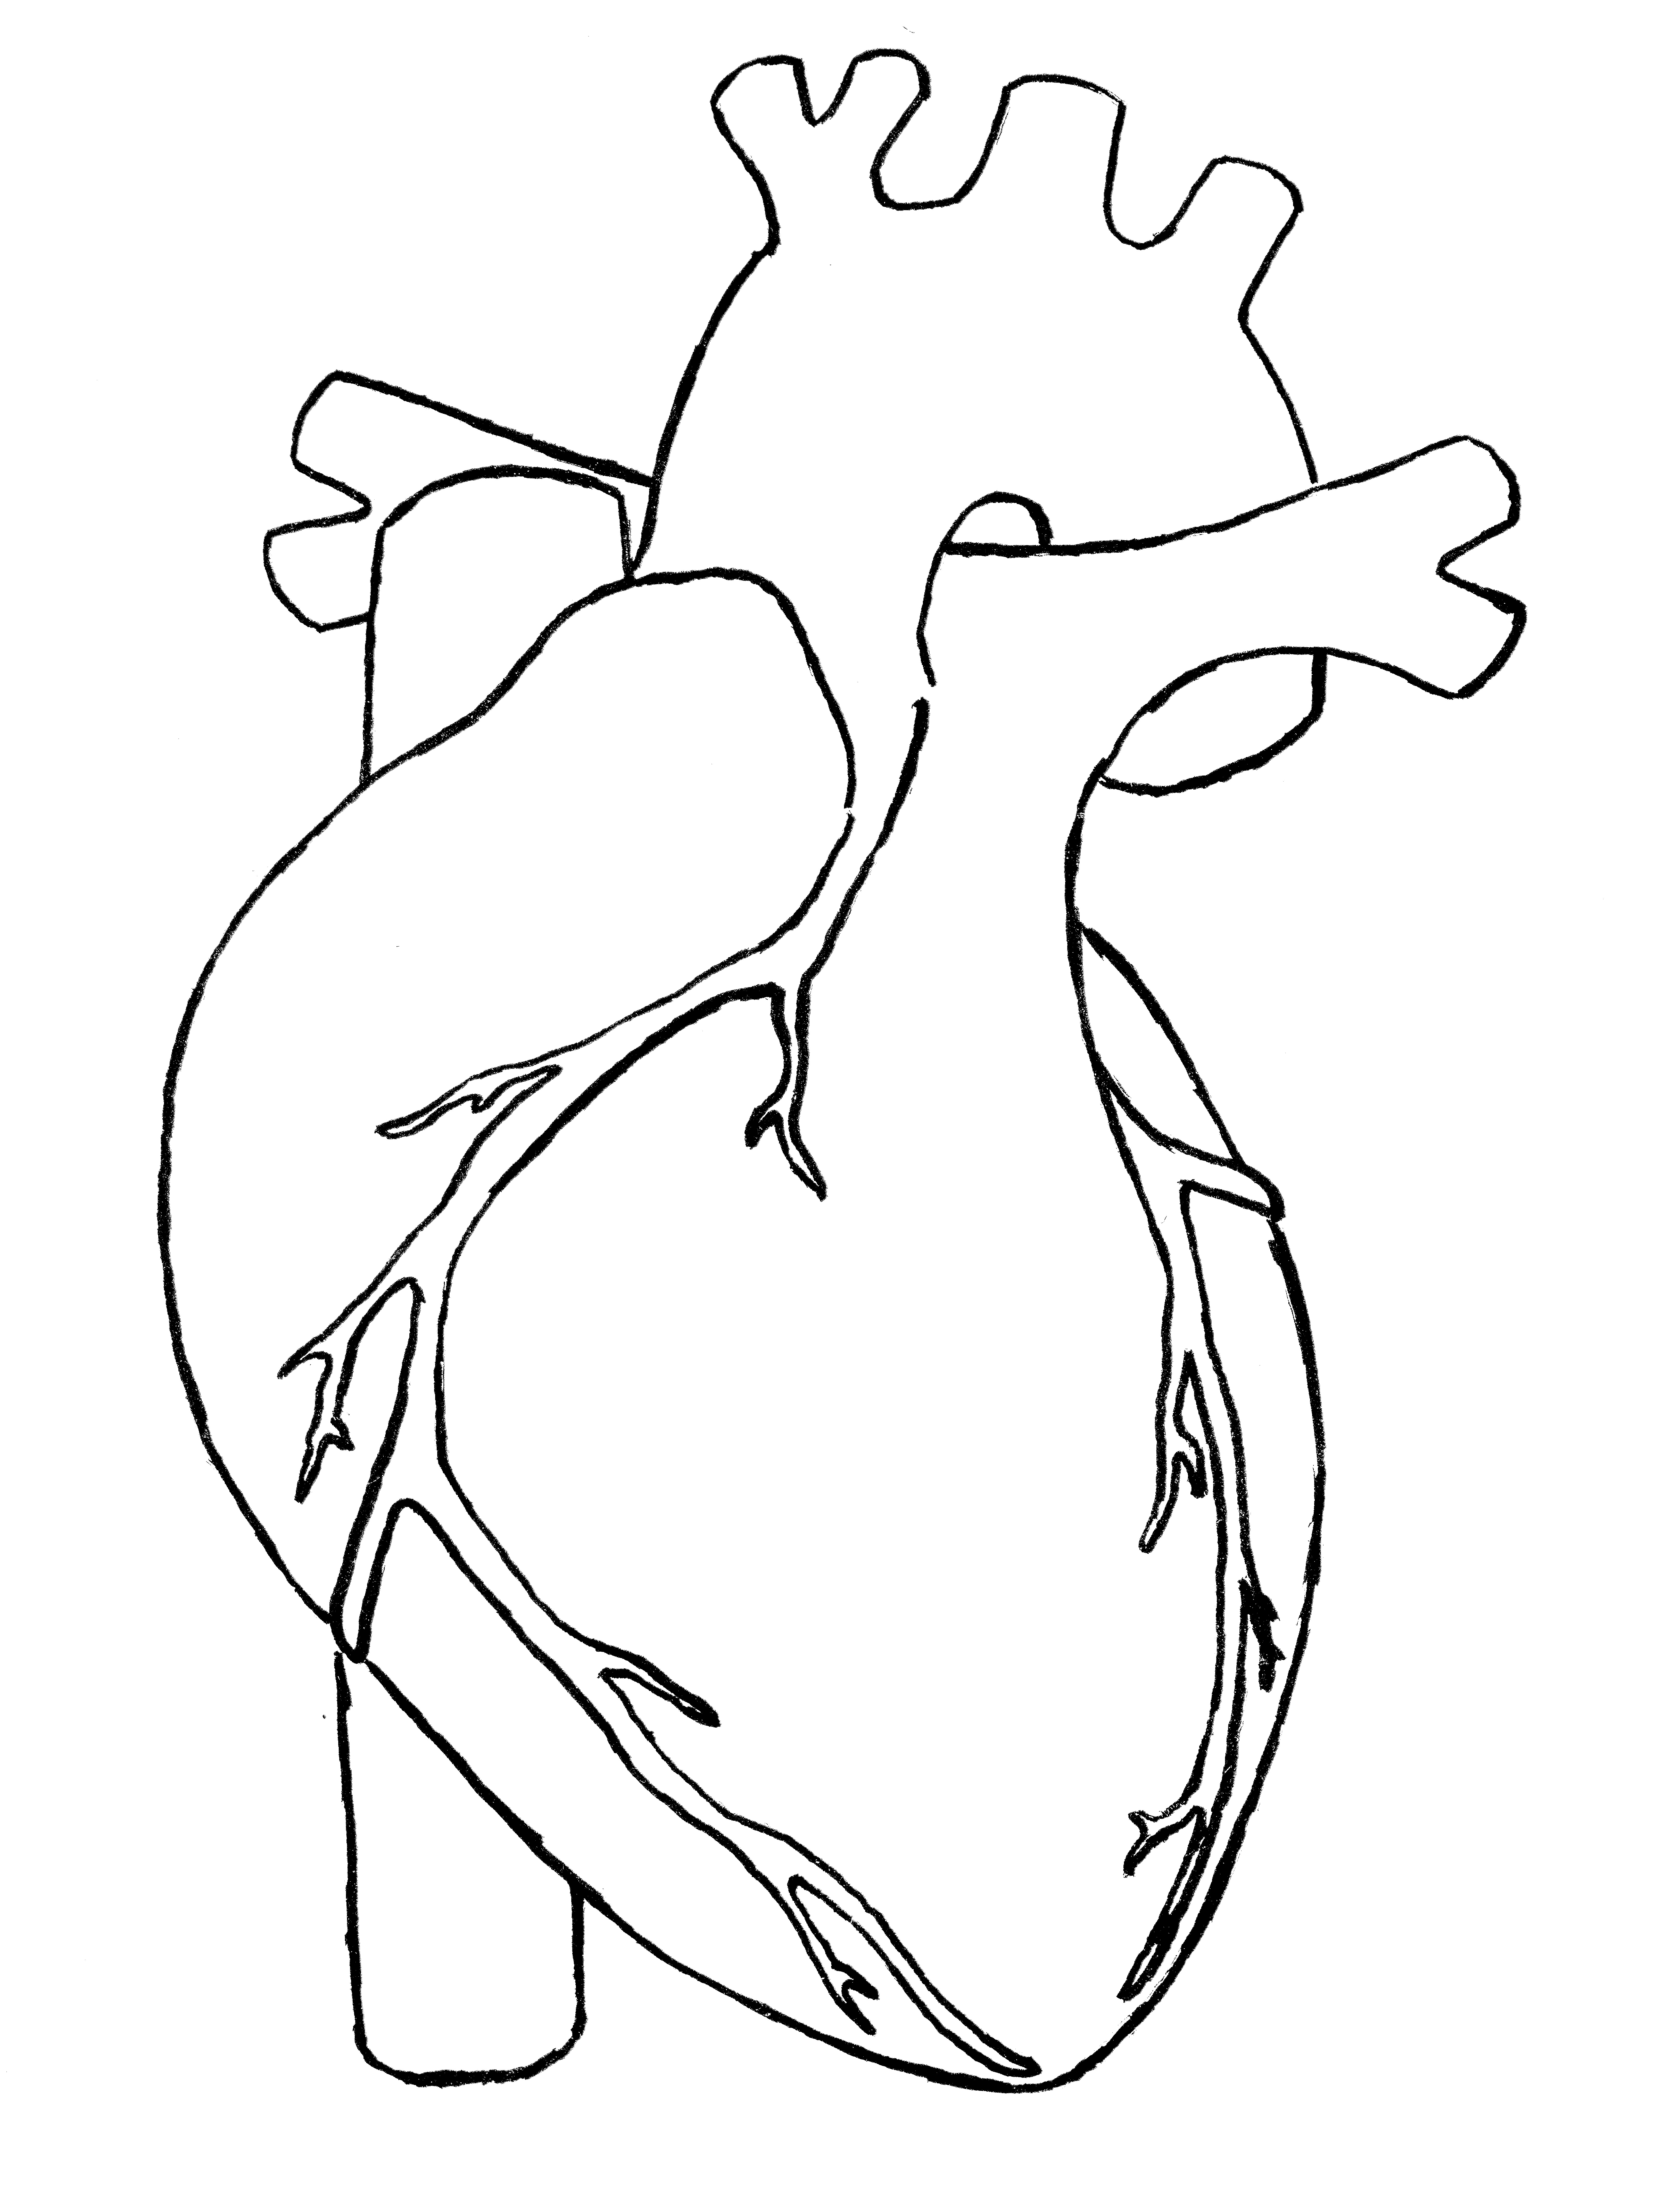 Free Anatomical Heart Pictures, Download Free Anatomical Heart Pictures